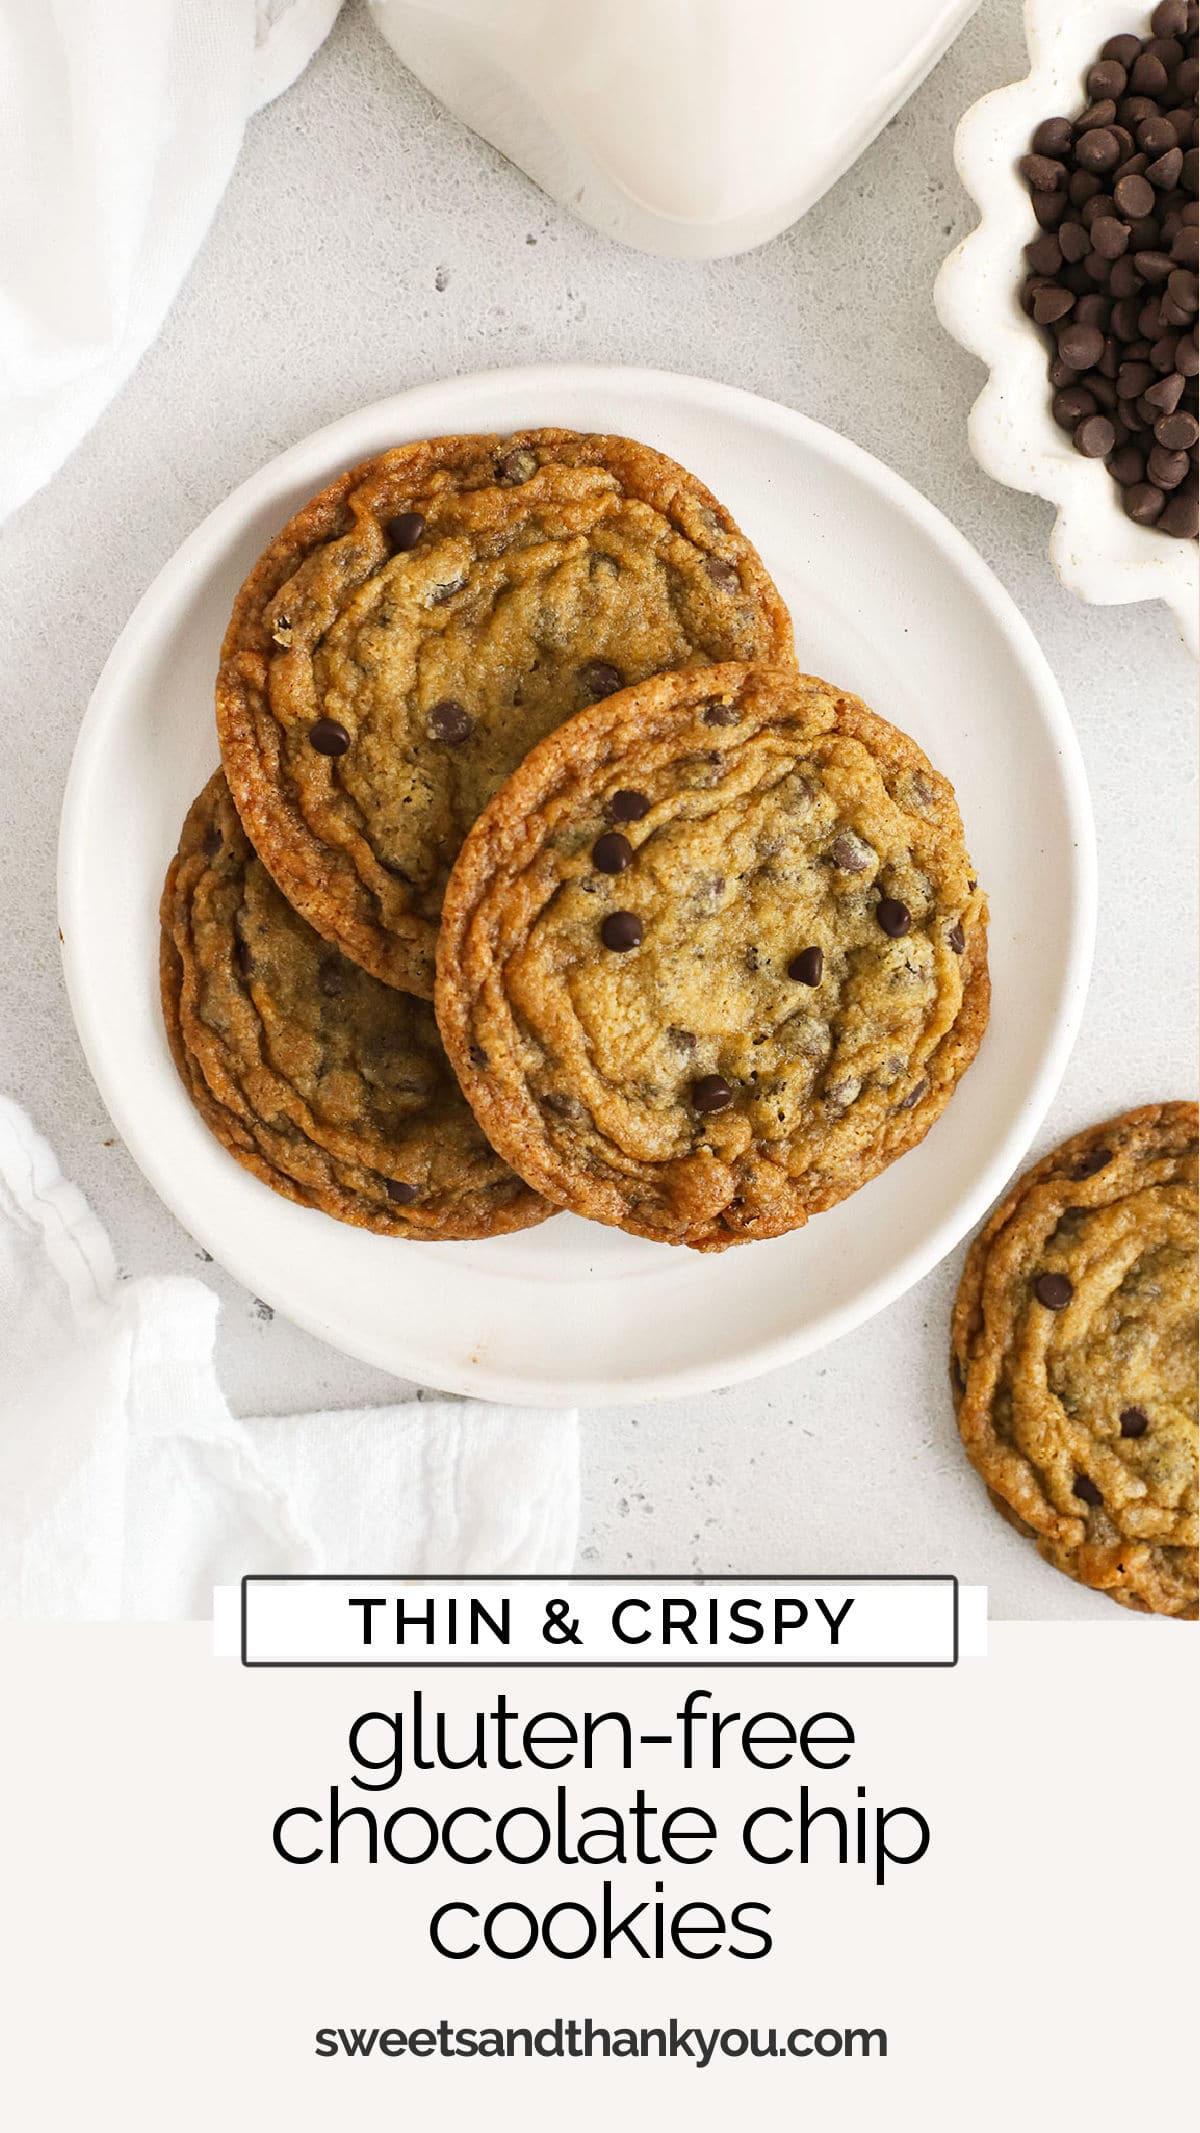 Calling all crispy cookie lovers! These Thin & Crispy Gluten-Free Chocolate Chip Cookies have all the classic flavor you crave, with a satisfying snap! / crisp gluten free chocolate chip cookie recipe / gluten-free chocolate chip cookies / the best gluten free chocolate chip cookies / tates bakeshop gluten free chocolate chip cookies / easy gluten free chocolate chip cookie recipe / gluten free cookies